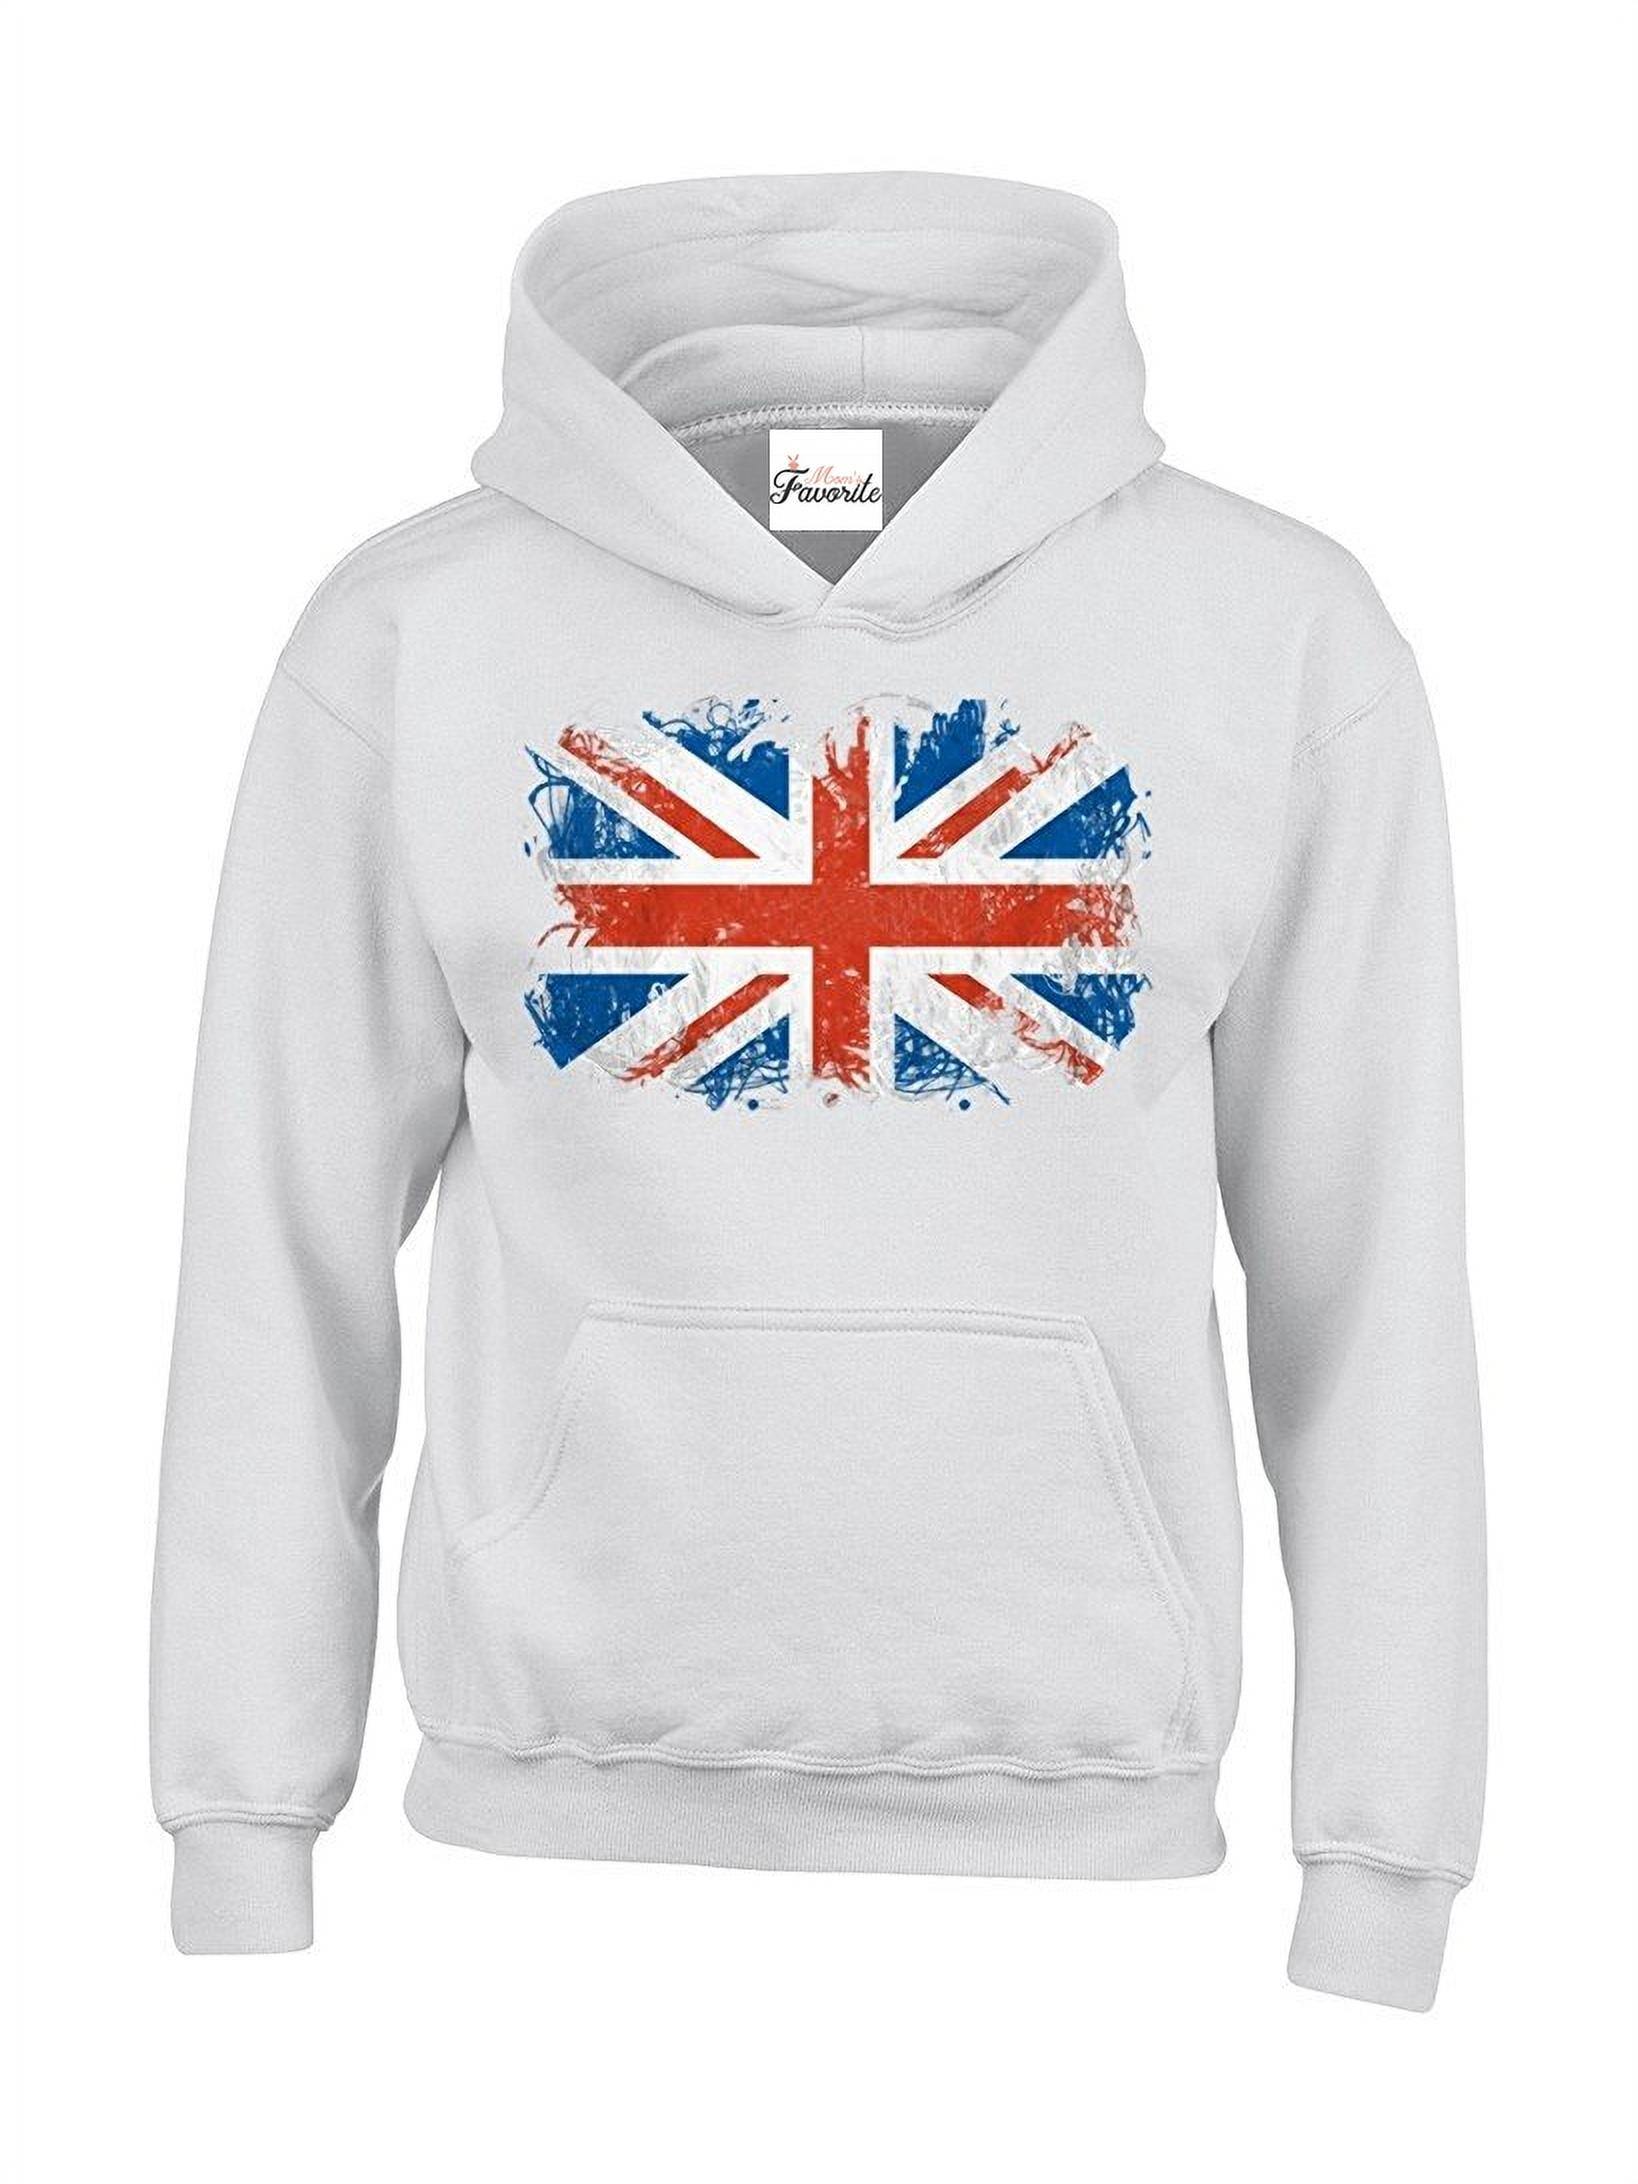 Union Jack Flag Design Zipped Jacket With Two Pockets 50% Polyester/50% Cotton 